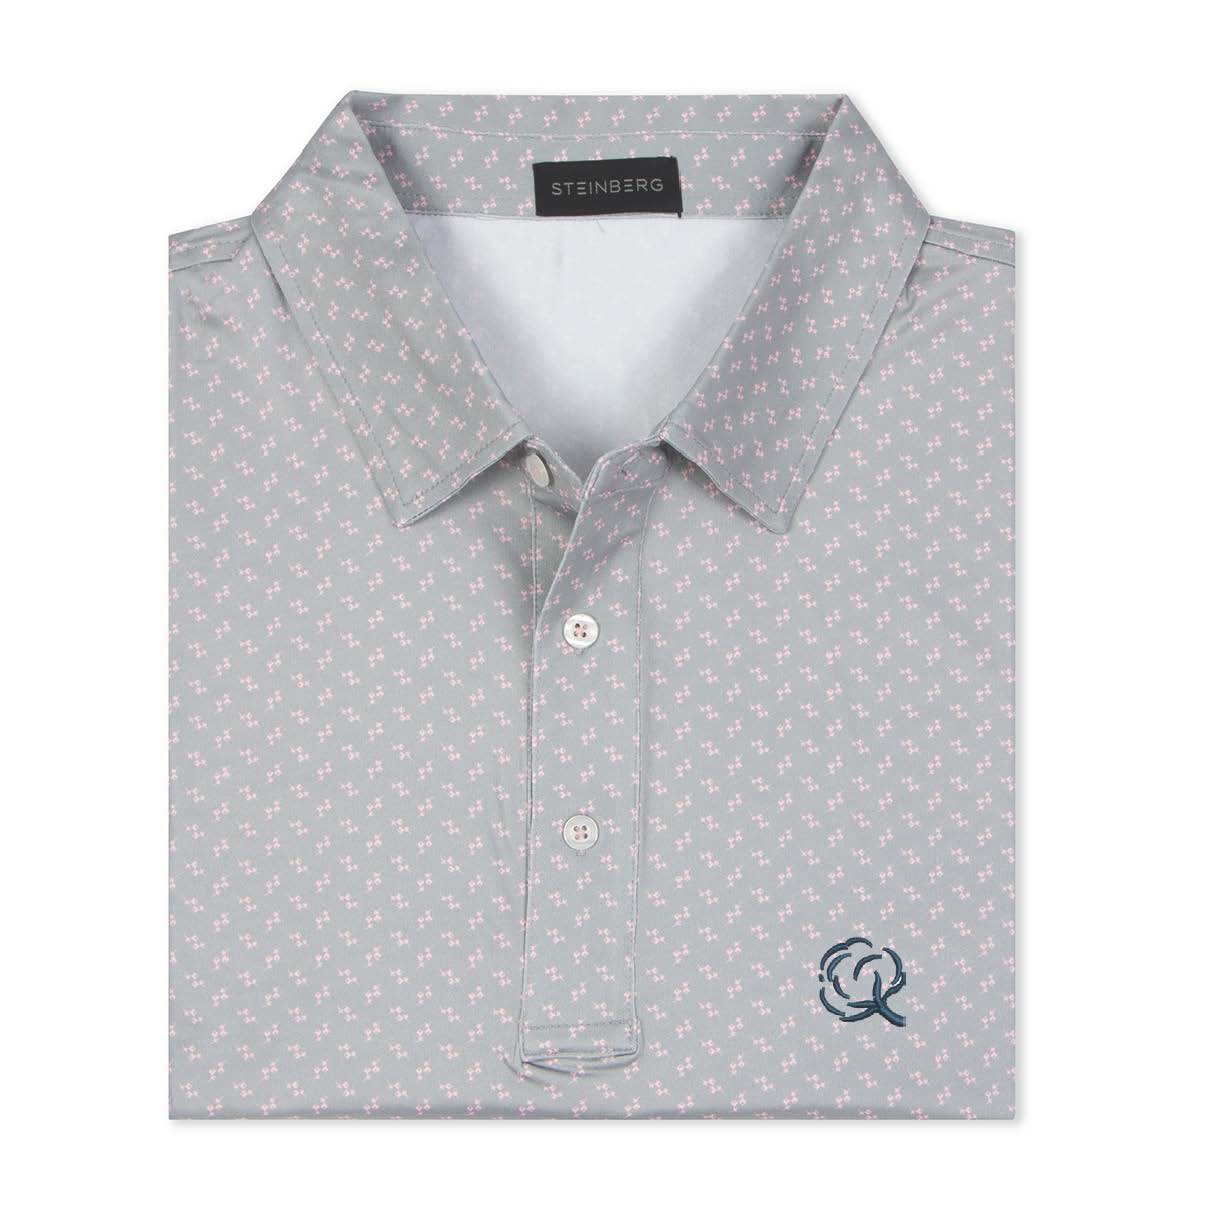 The Lie Performance Polo Cotton Collection